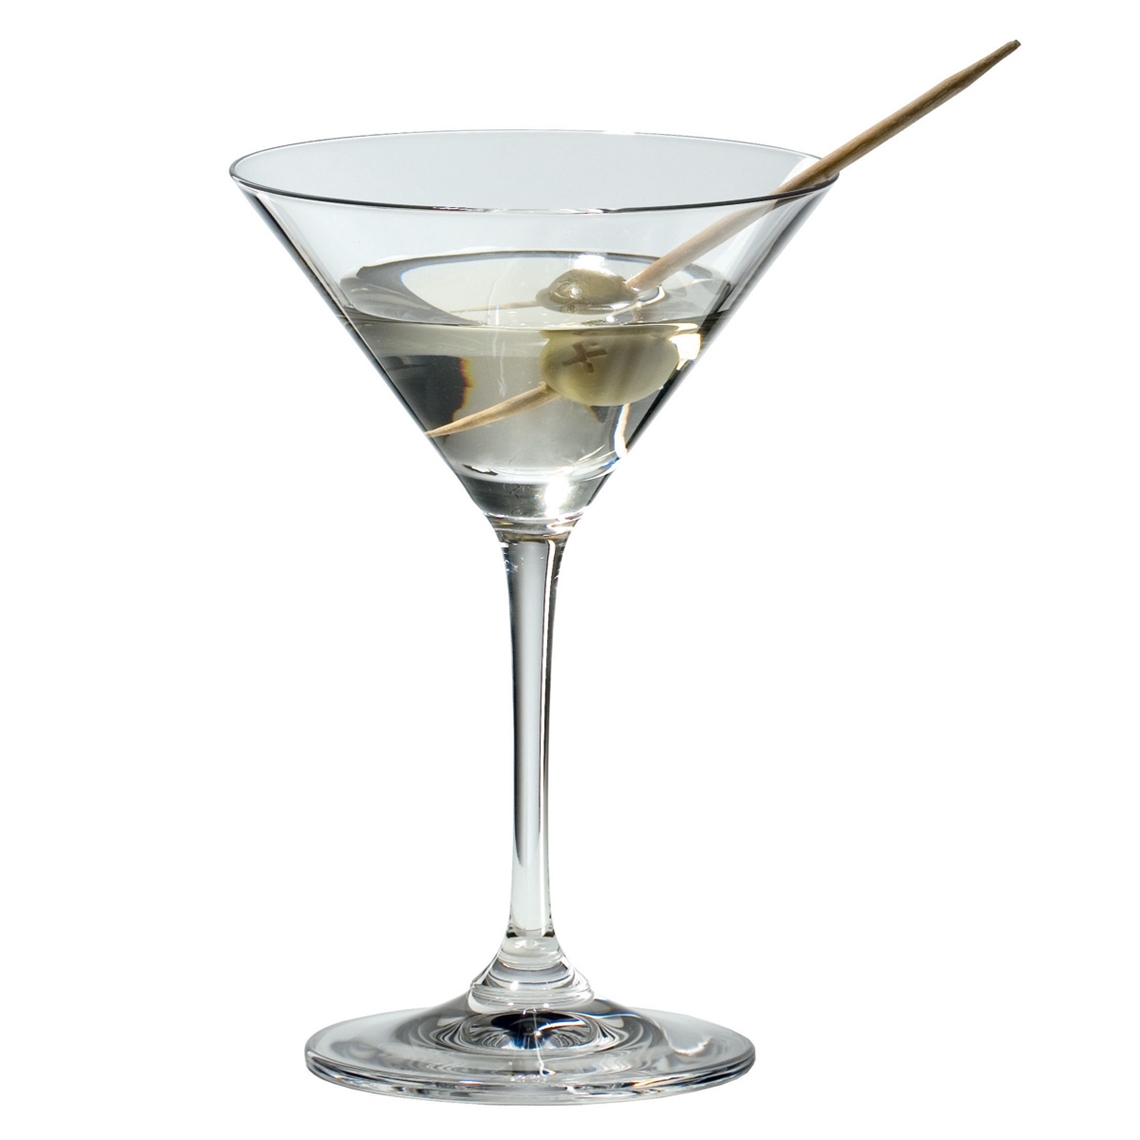 View more beginners guide to different types of wine glasses from our Martini Glasses range